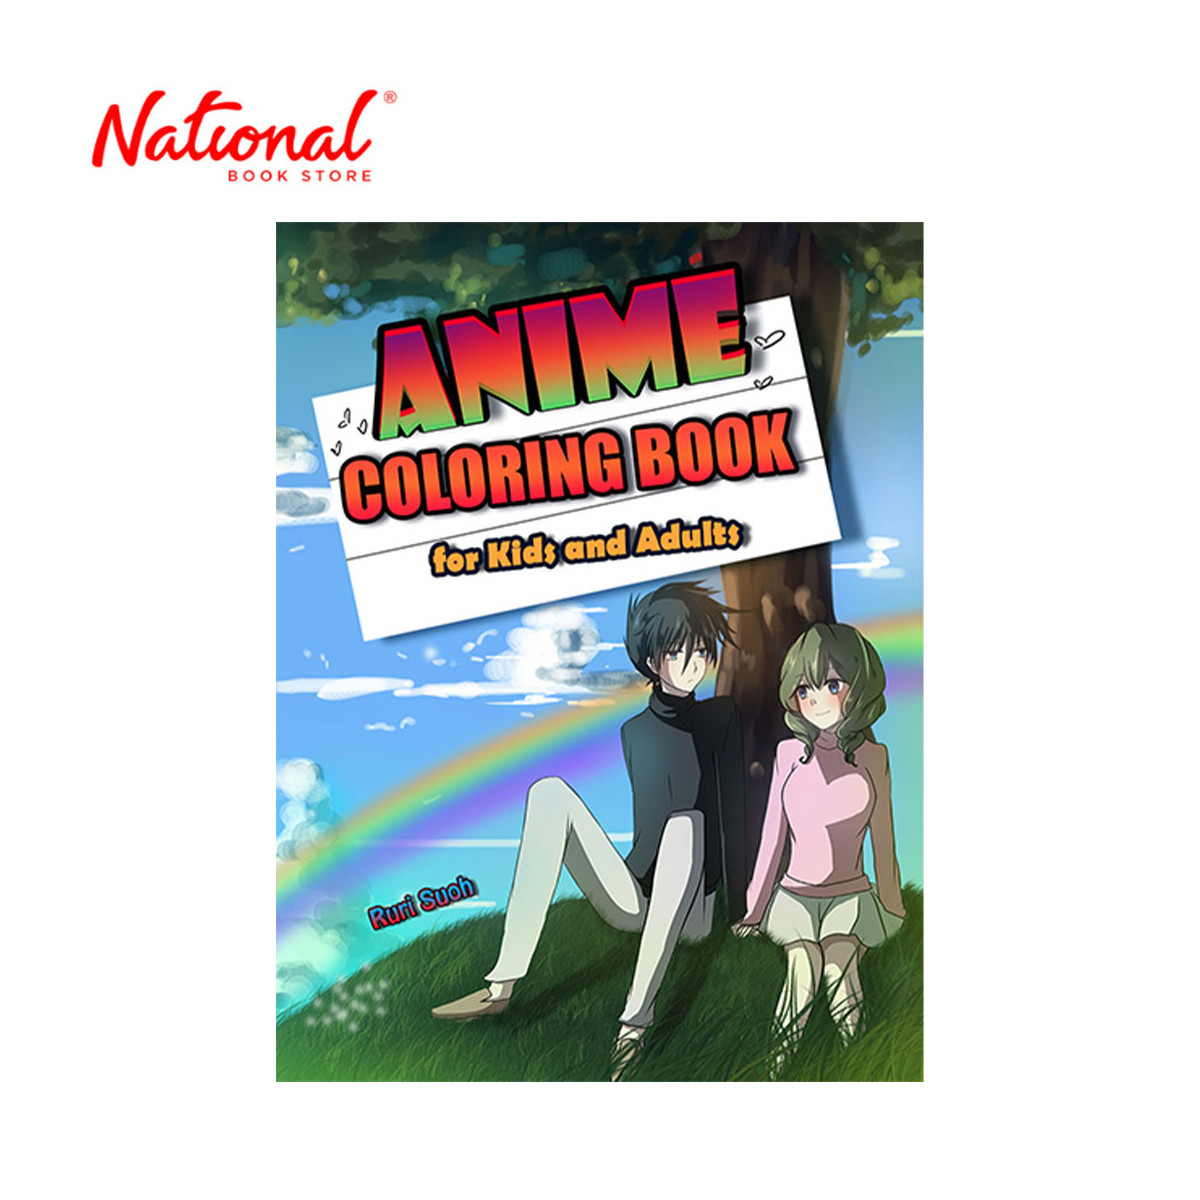 Anime Coloring Book for Kids and Adults by Ruri Suoh - Trade Paperback - Lifestyle - Art